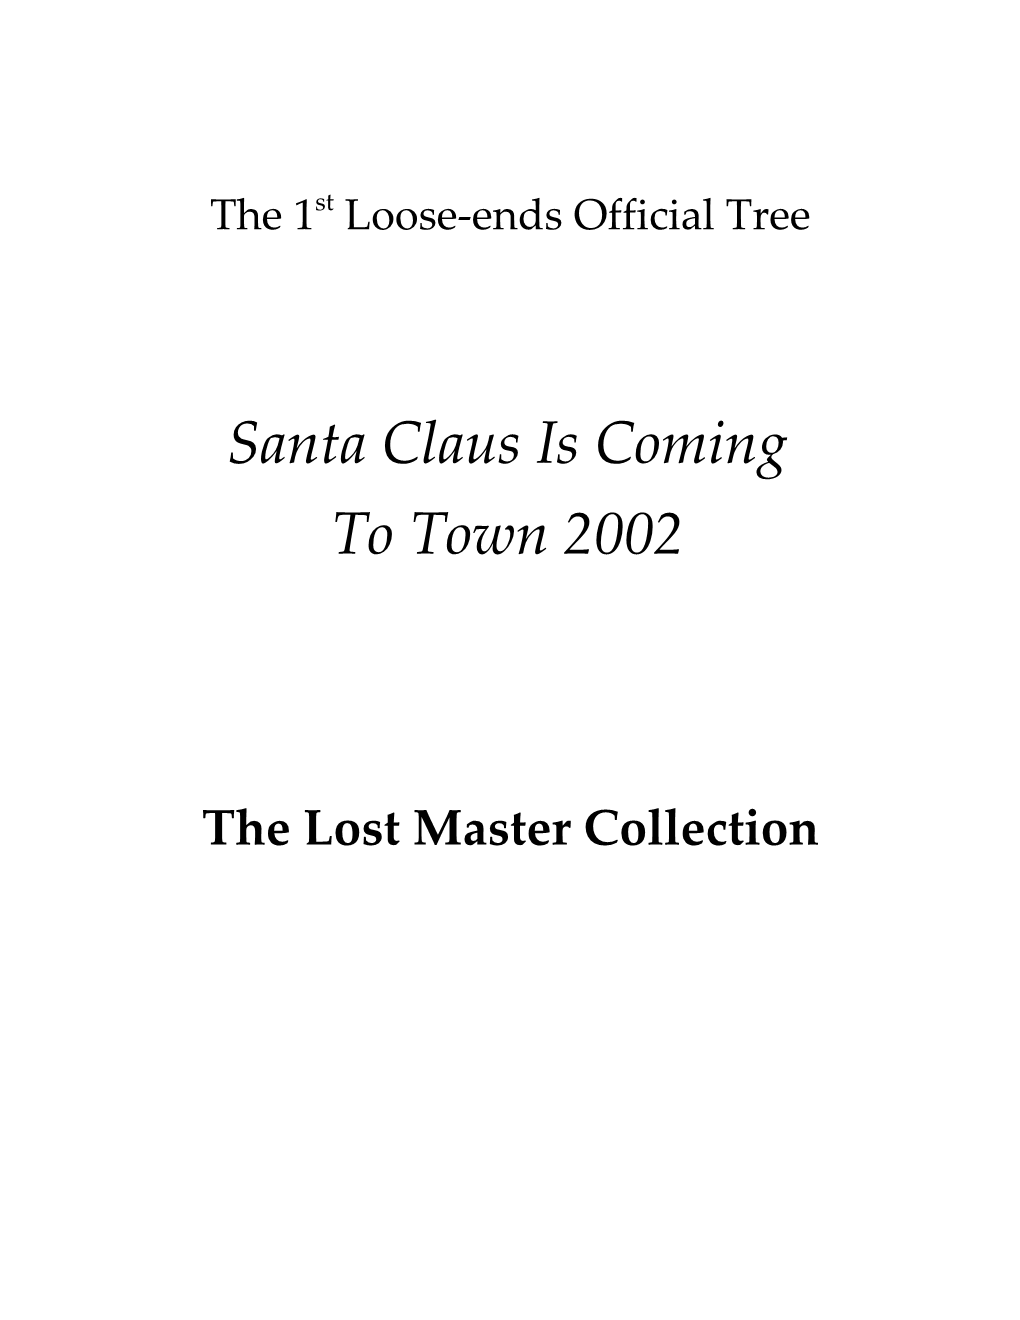 The Loose-Ends Official Tree